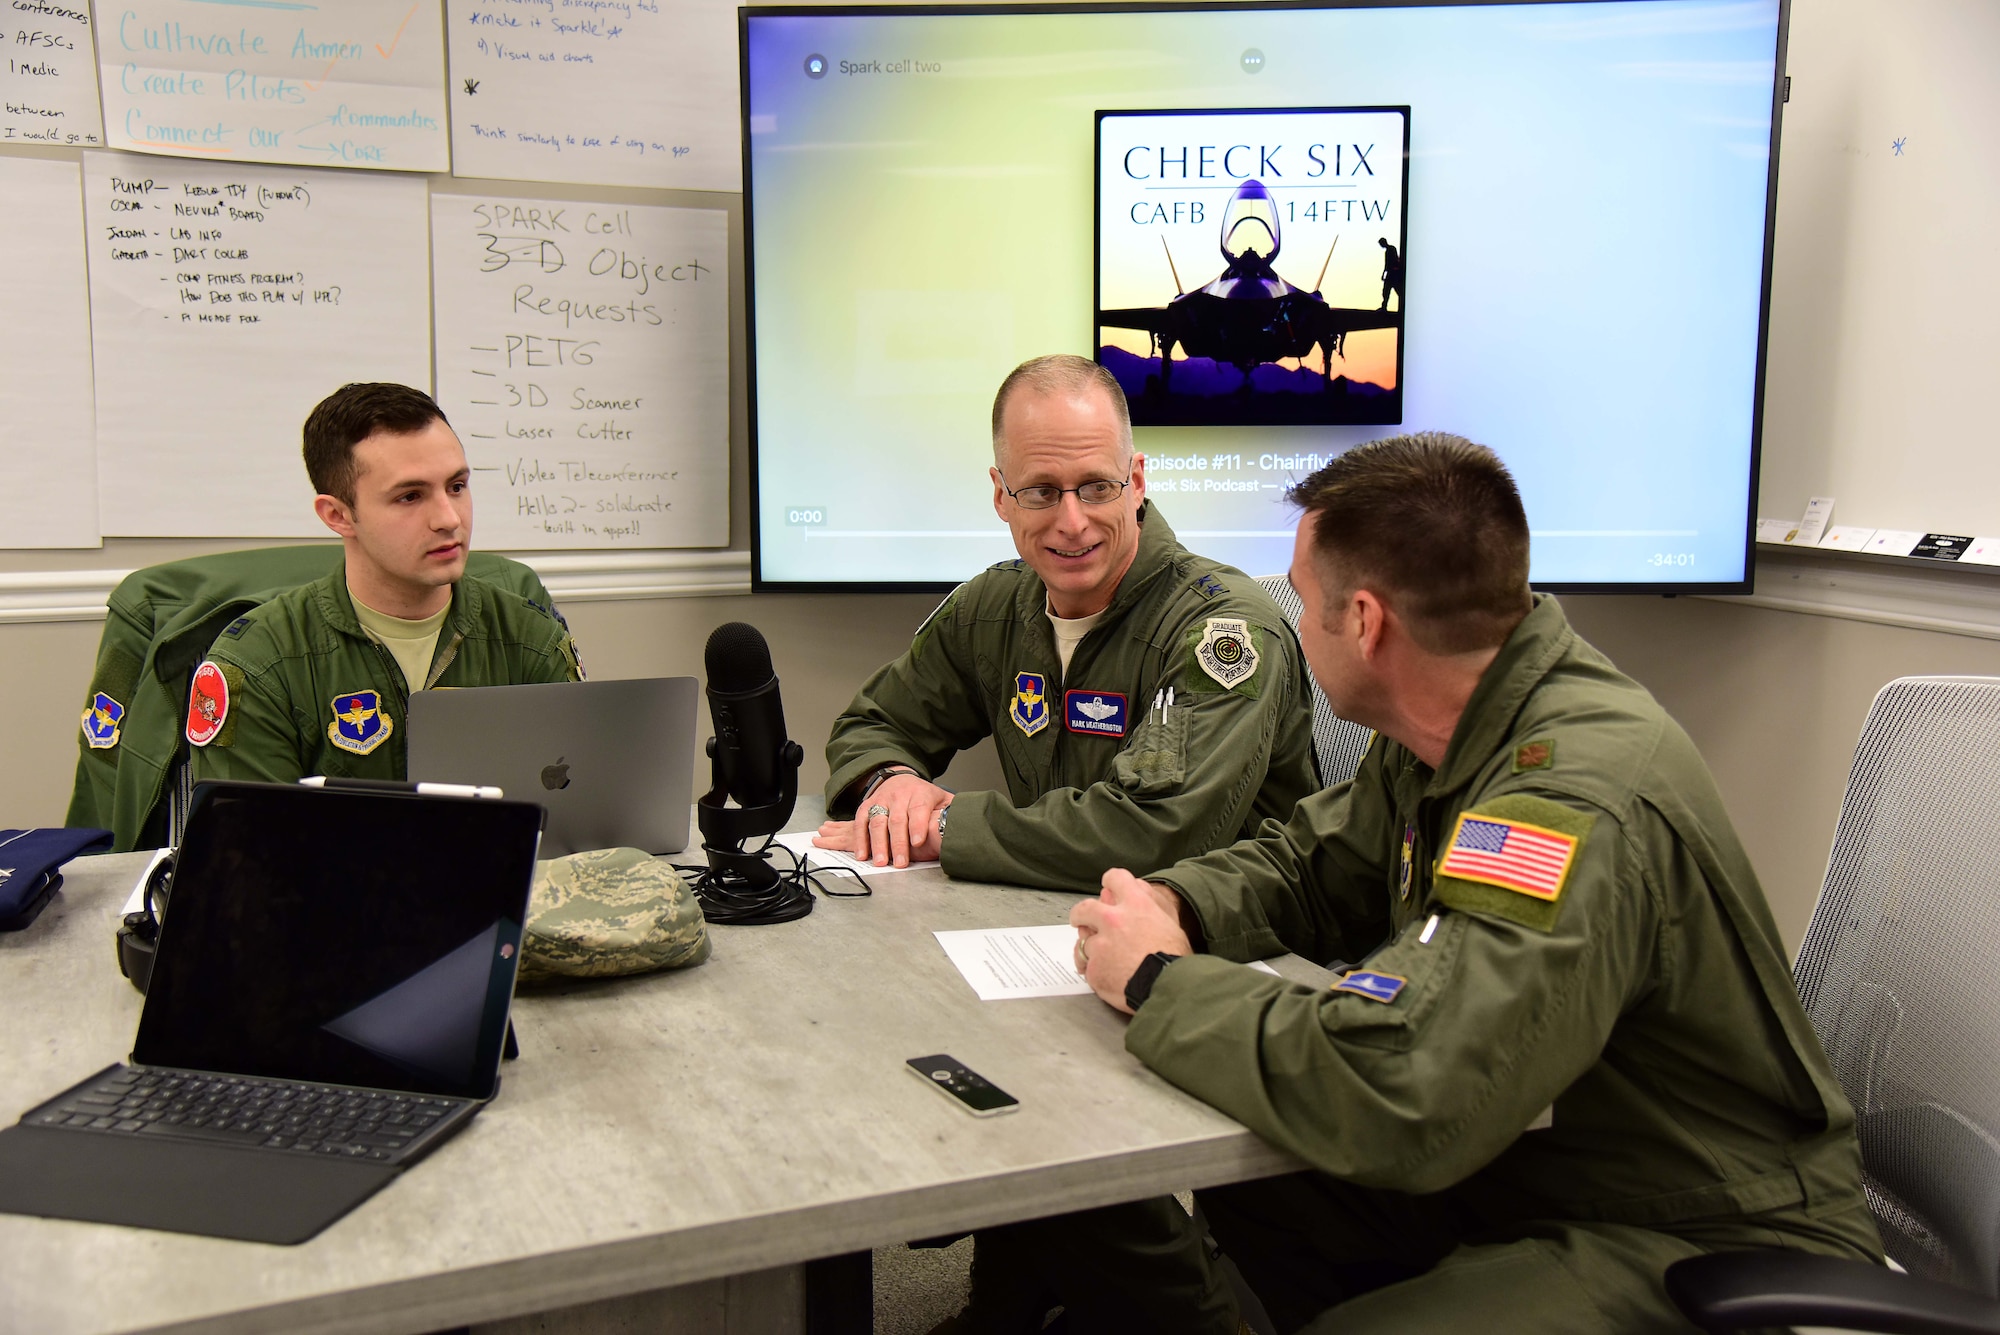 Capt. Phillip Huebner, 37th Flying Training Squadron instructor pilot, and Maj. Ryan Brewer, 14th Flying Training Wing director of innovation, speak to Maj. Gen. Mark Weatherington, deputy commander of Air Education and Training Command, on their Check Six podcast Feb. 21, 2019, on Columbus Air Force Base, Mississippi. Weatherington was the first guest appearance on the podcast. (U.S. Air Force photo by Elizabeth Owens)